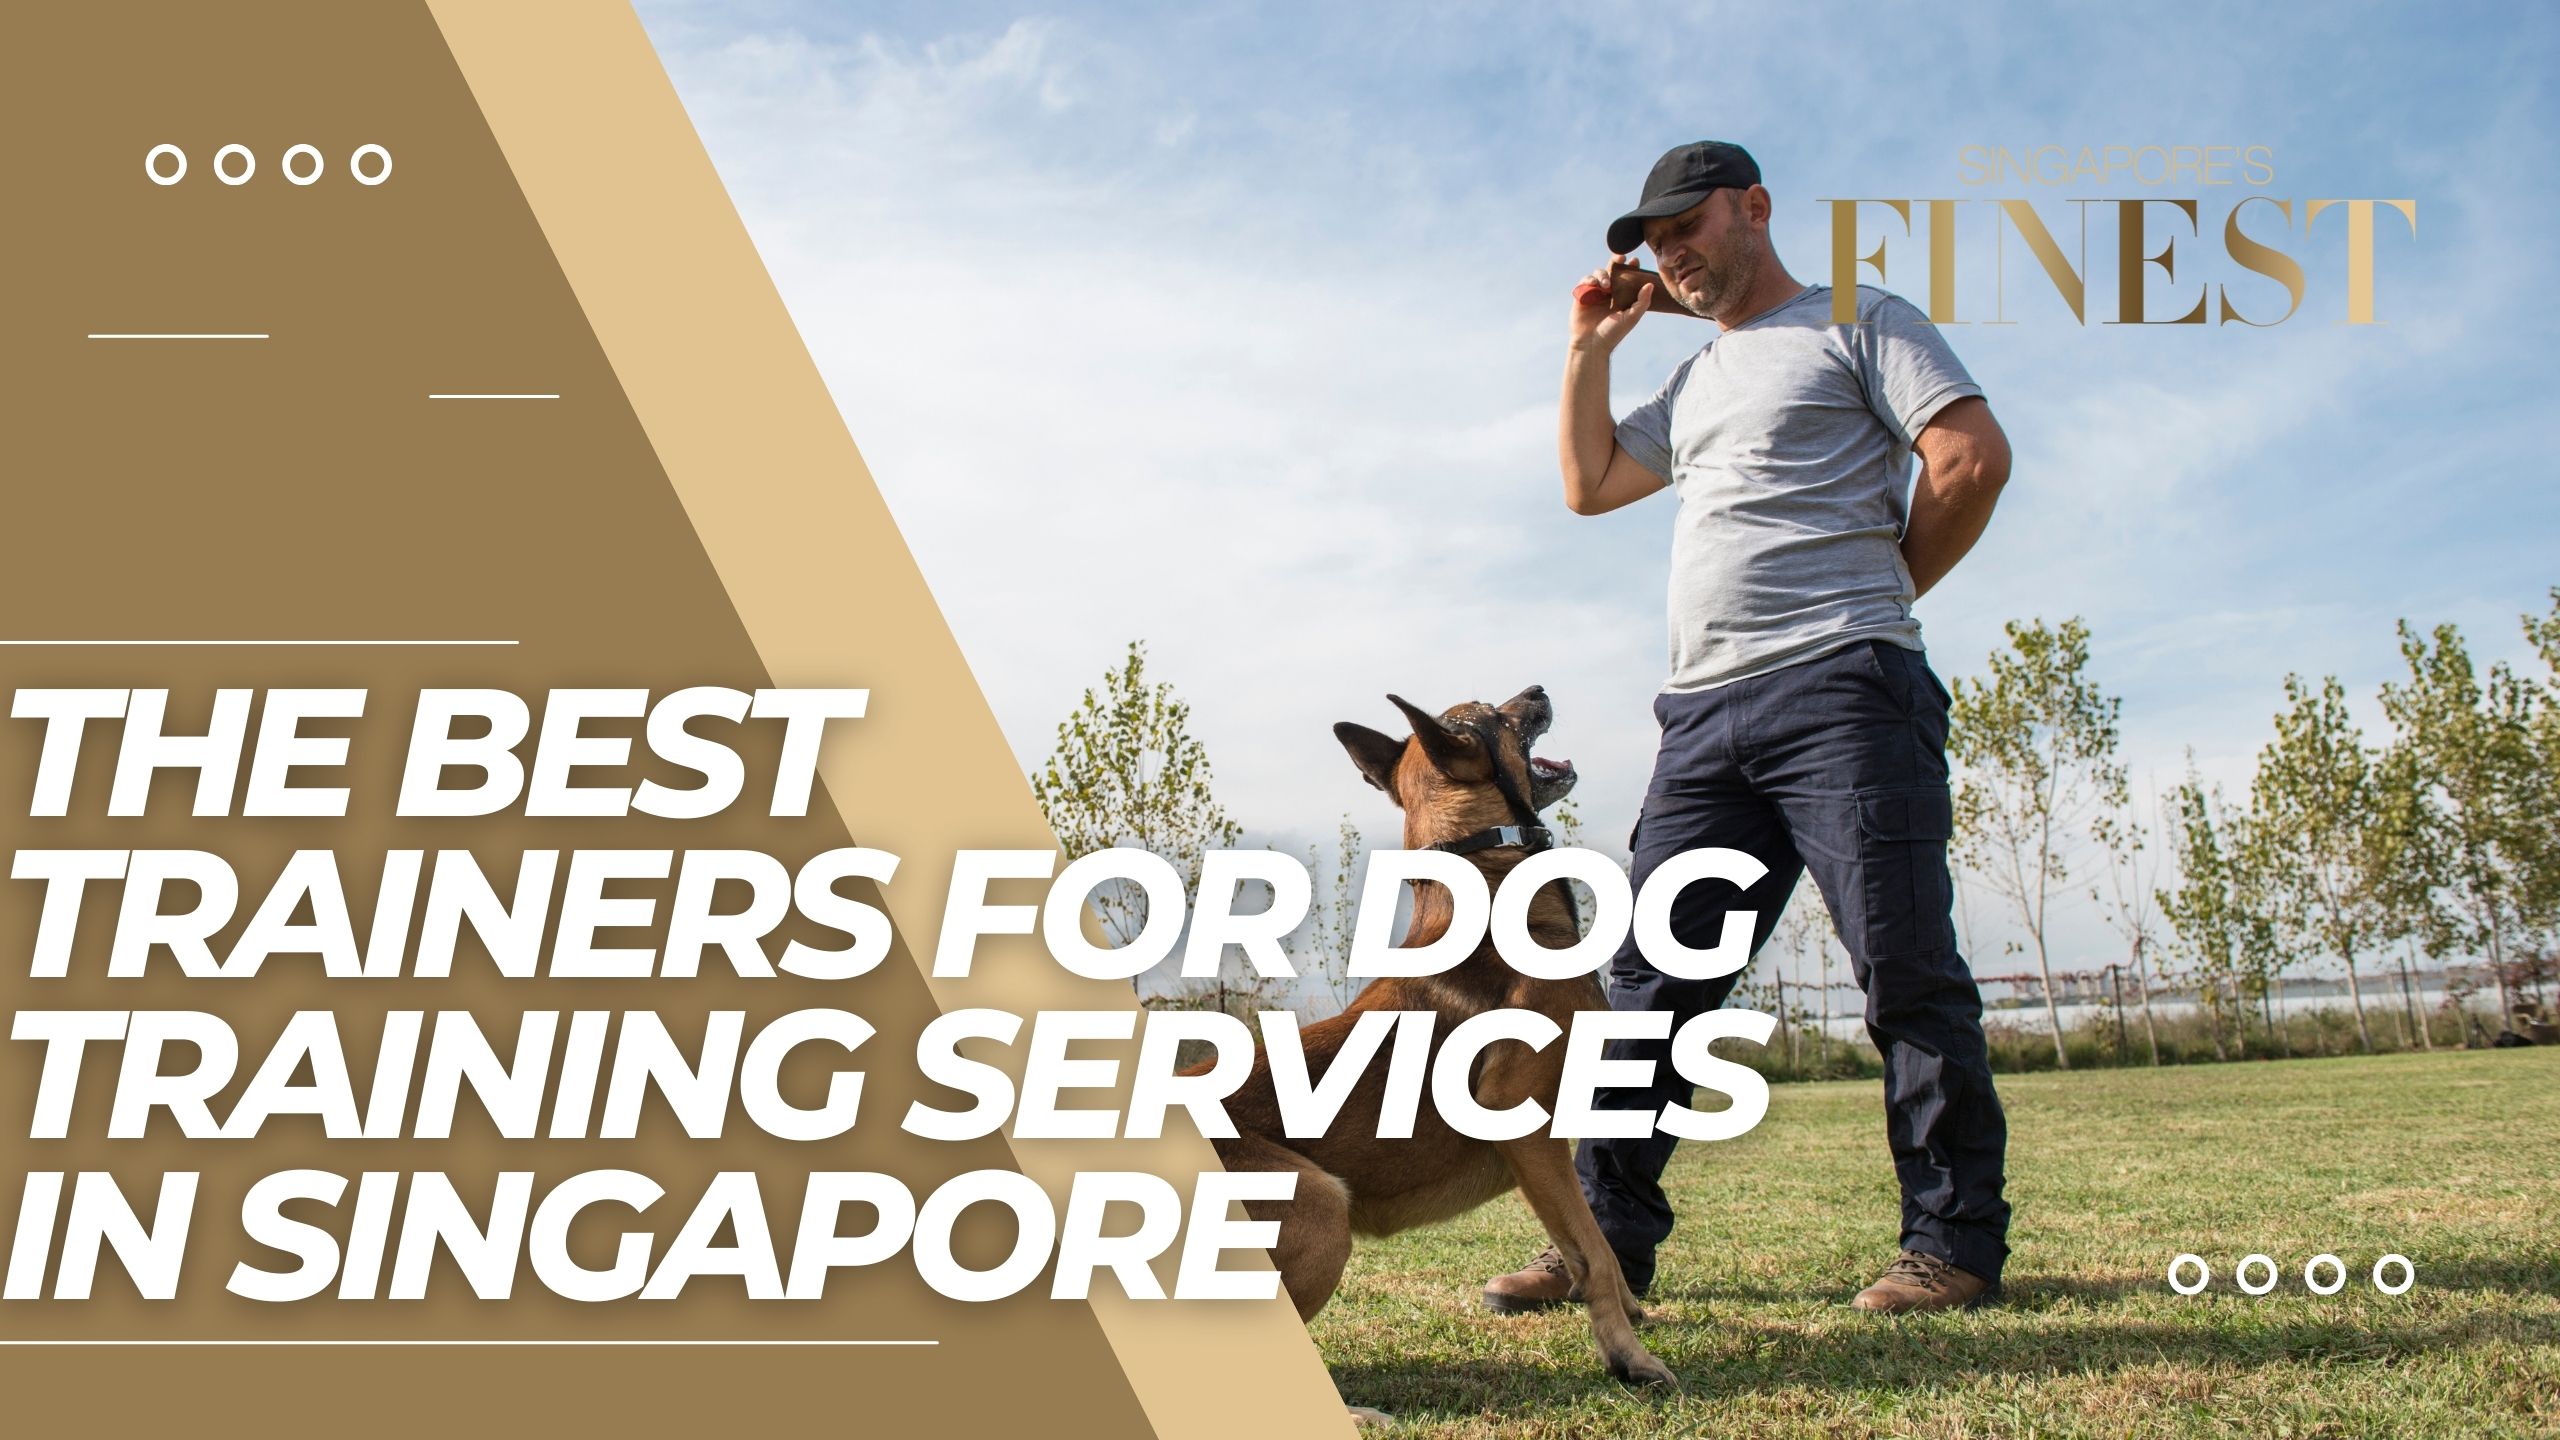 The Finest Trainers for Dog Training Services in Singapore